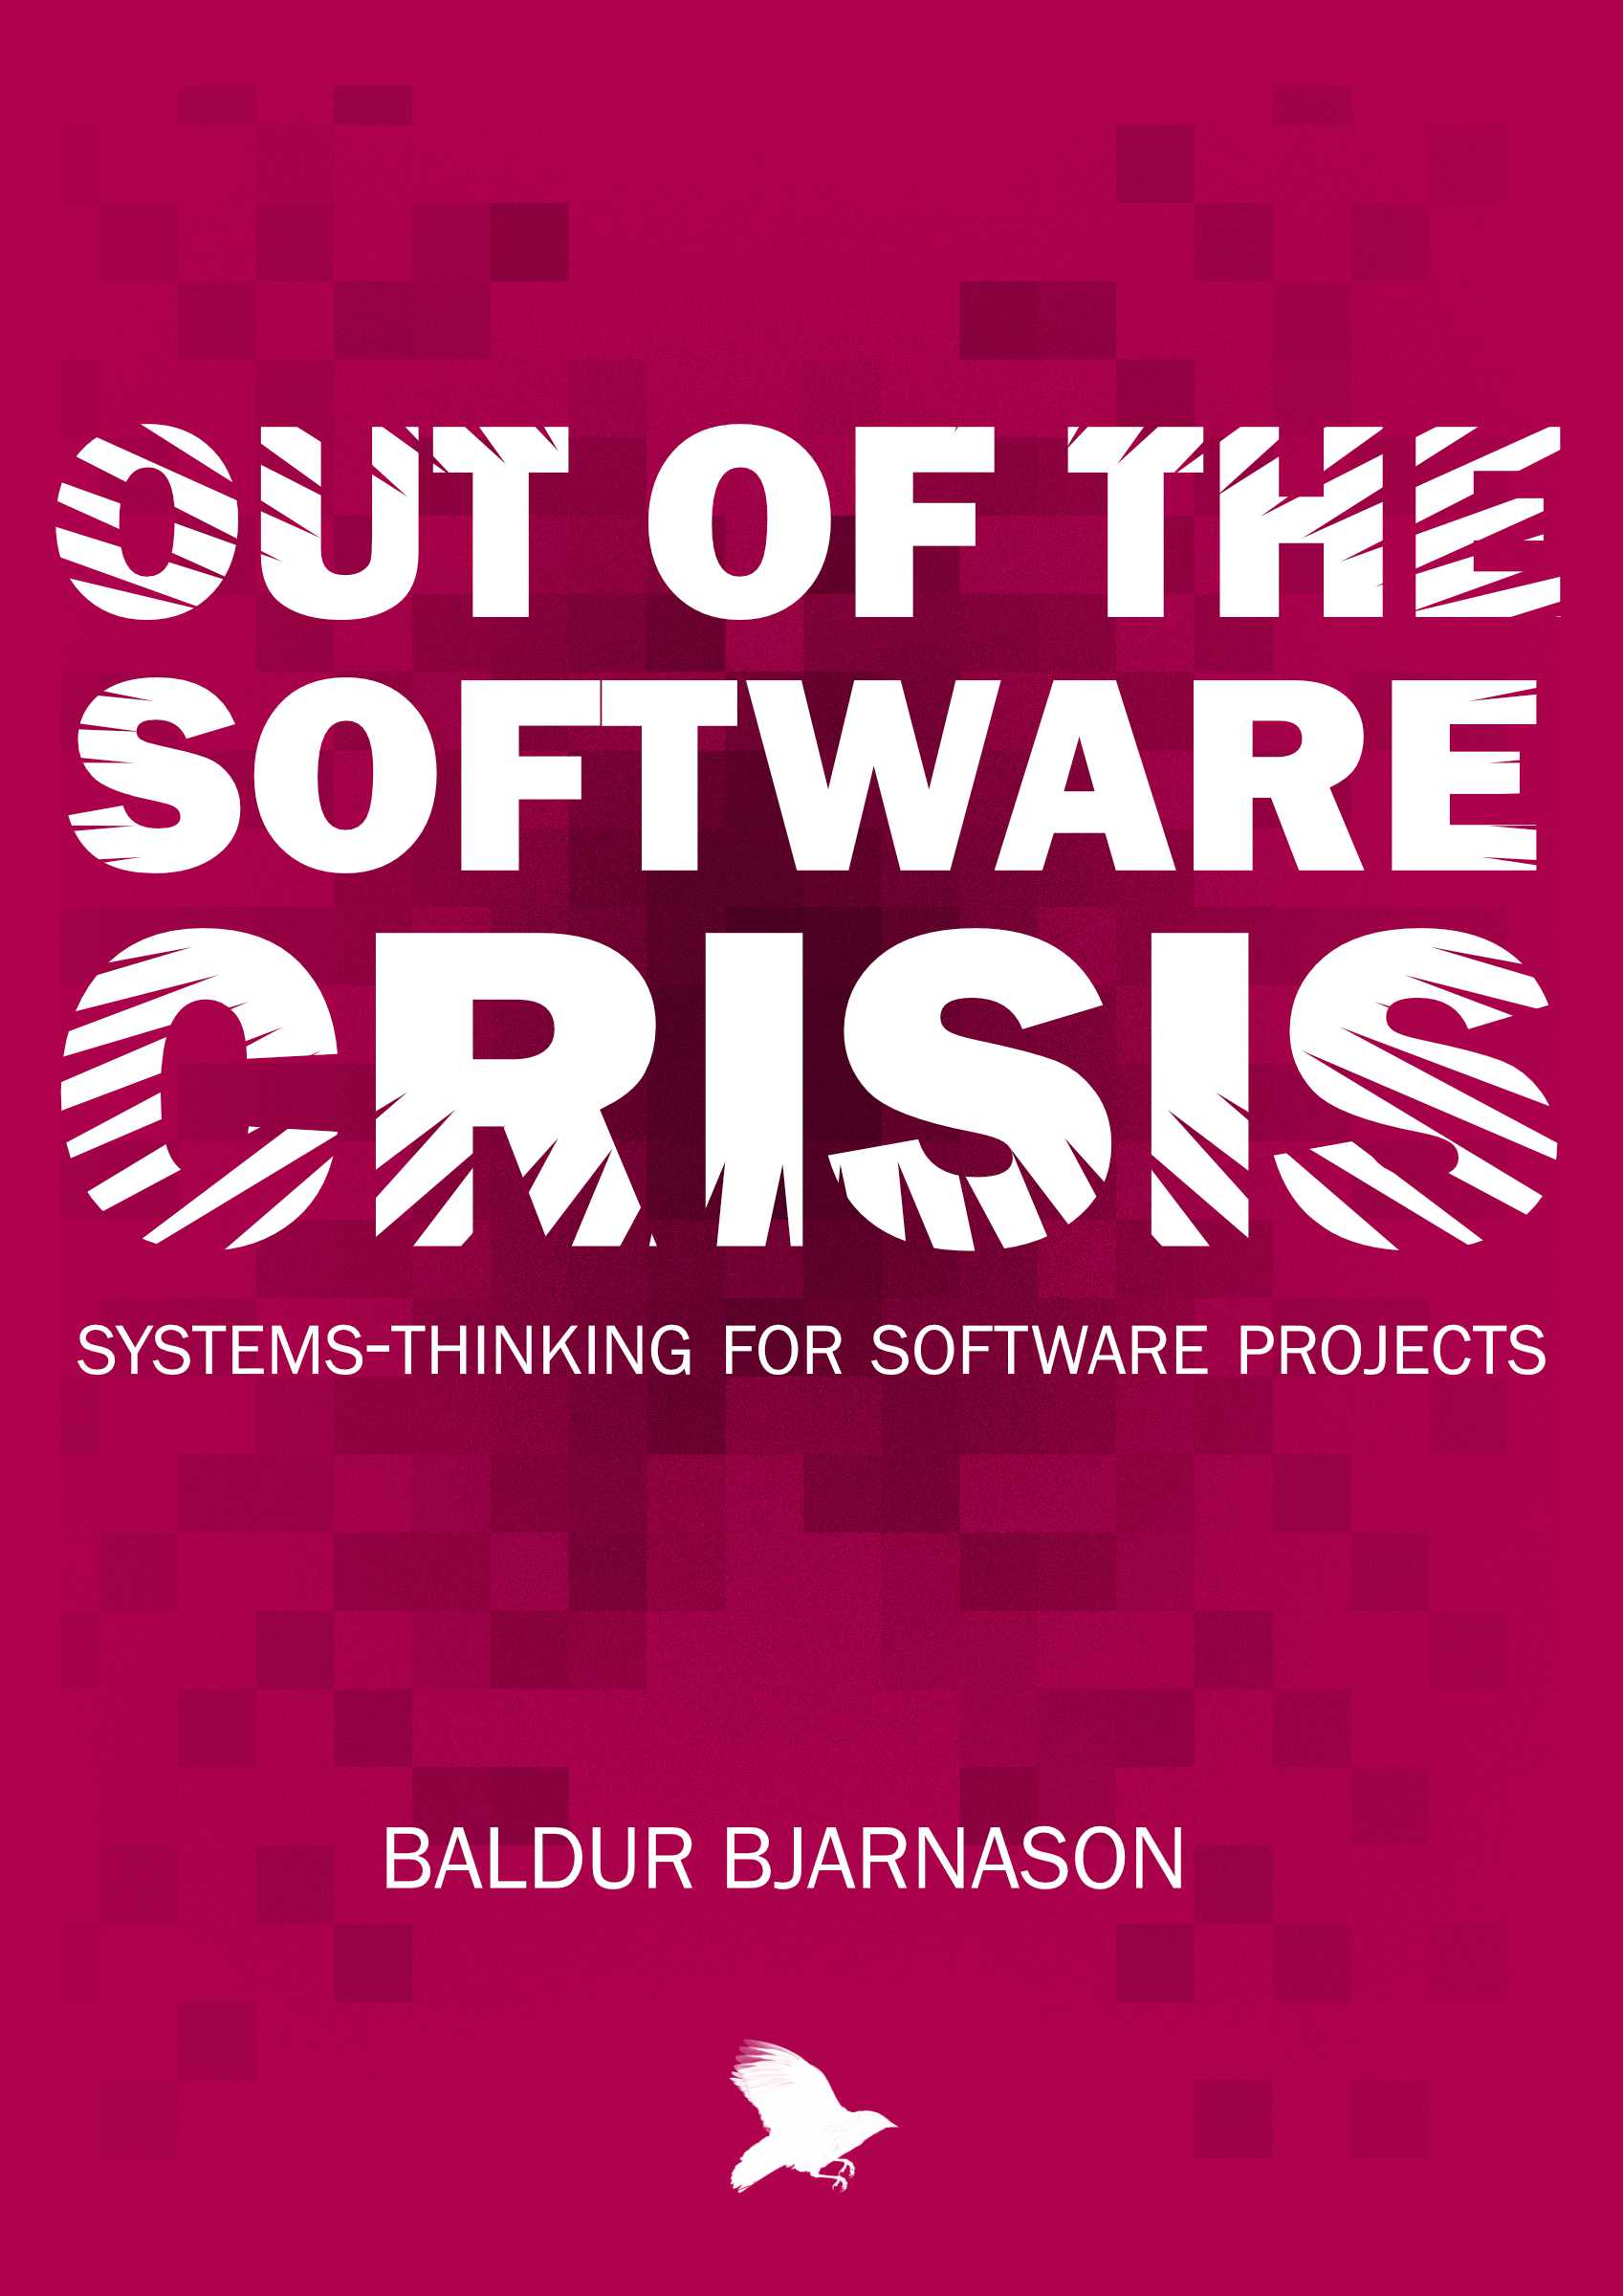 Cover for the book 'Out of the Software Crisis